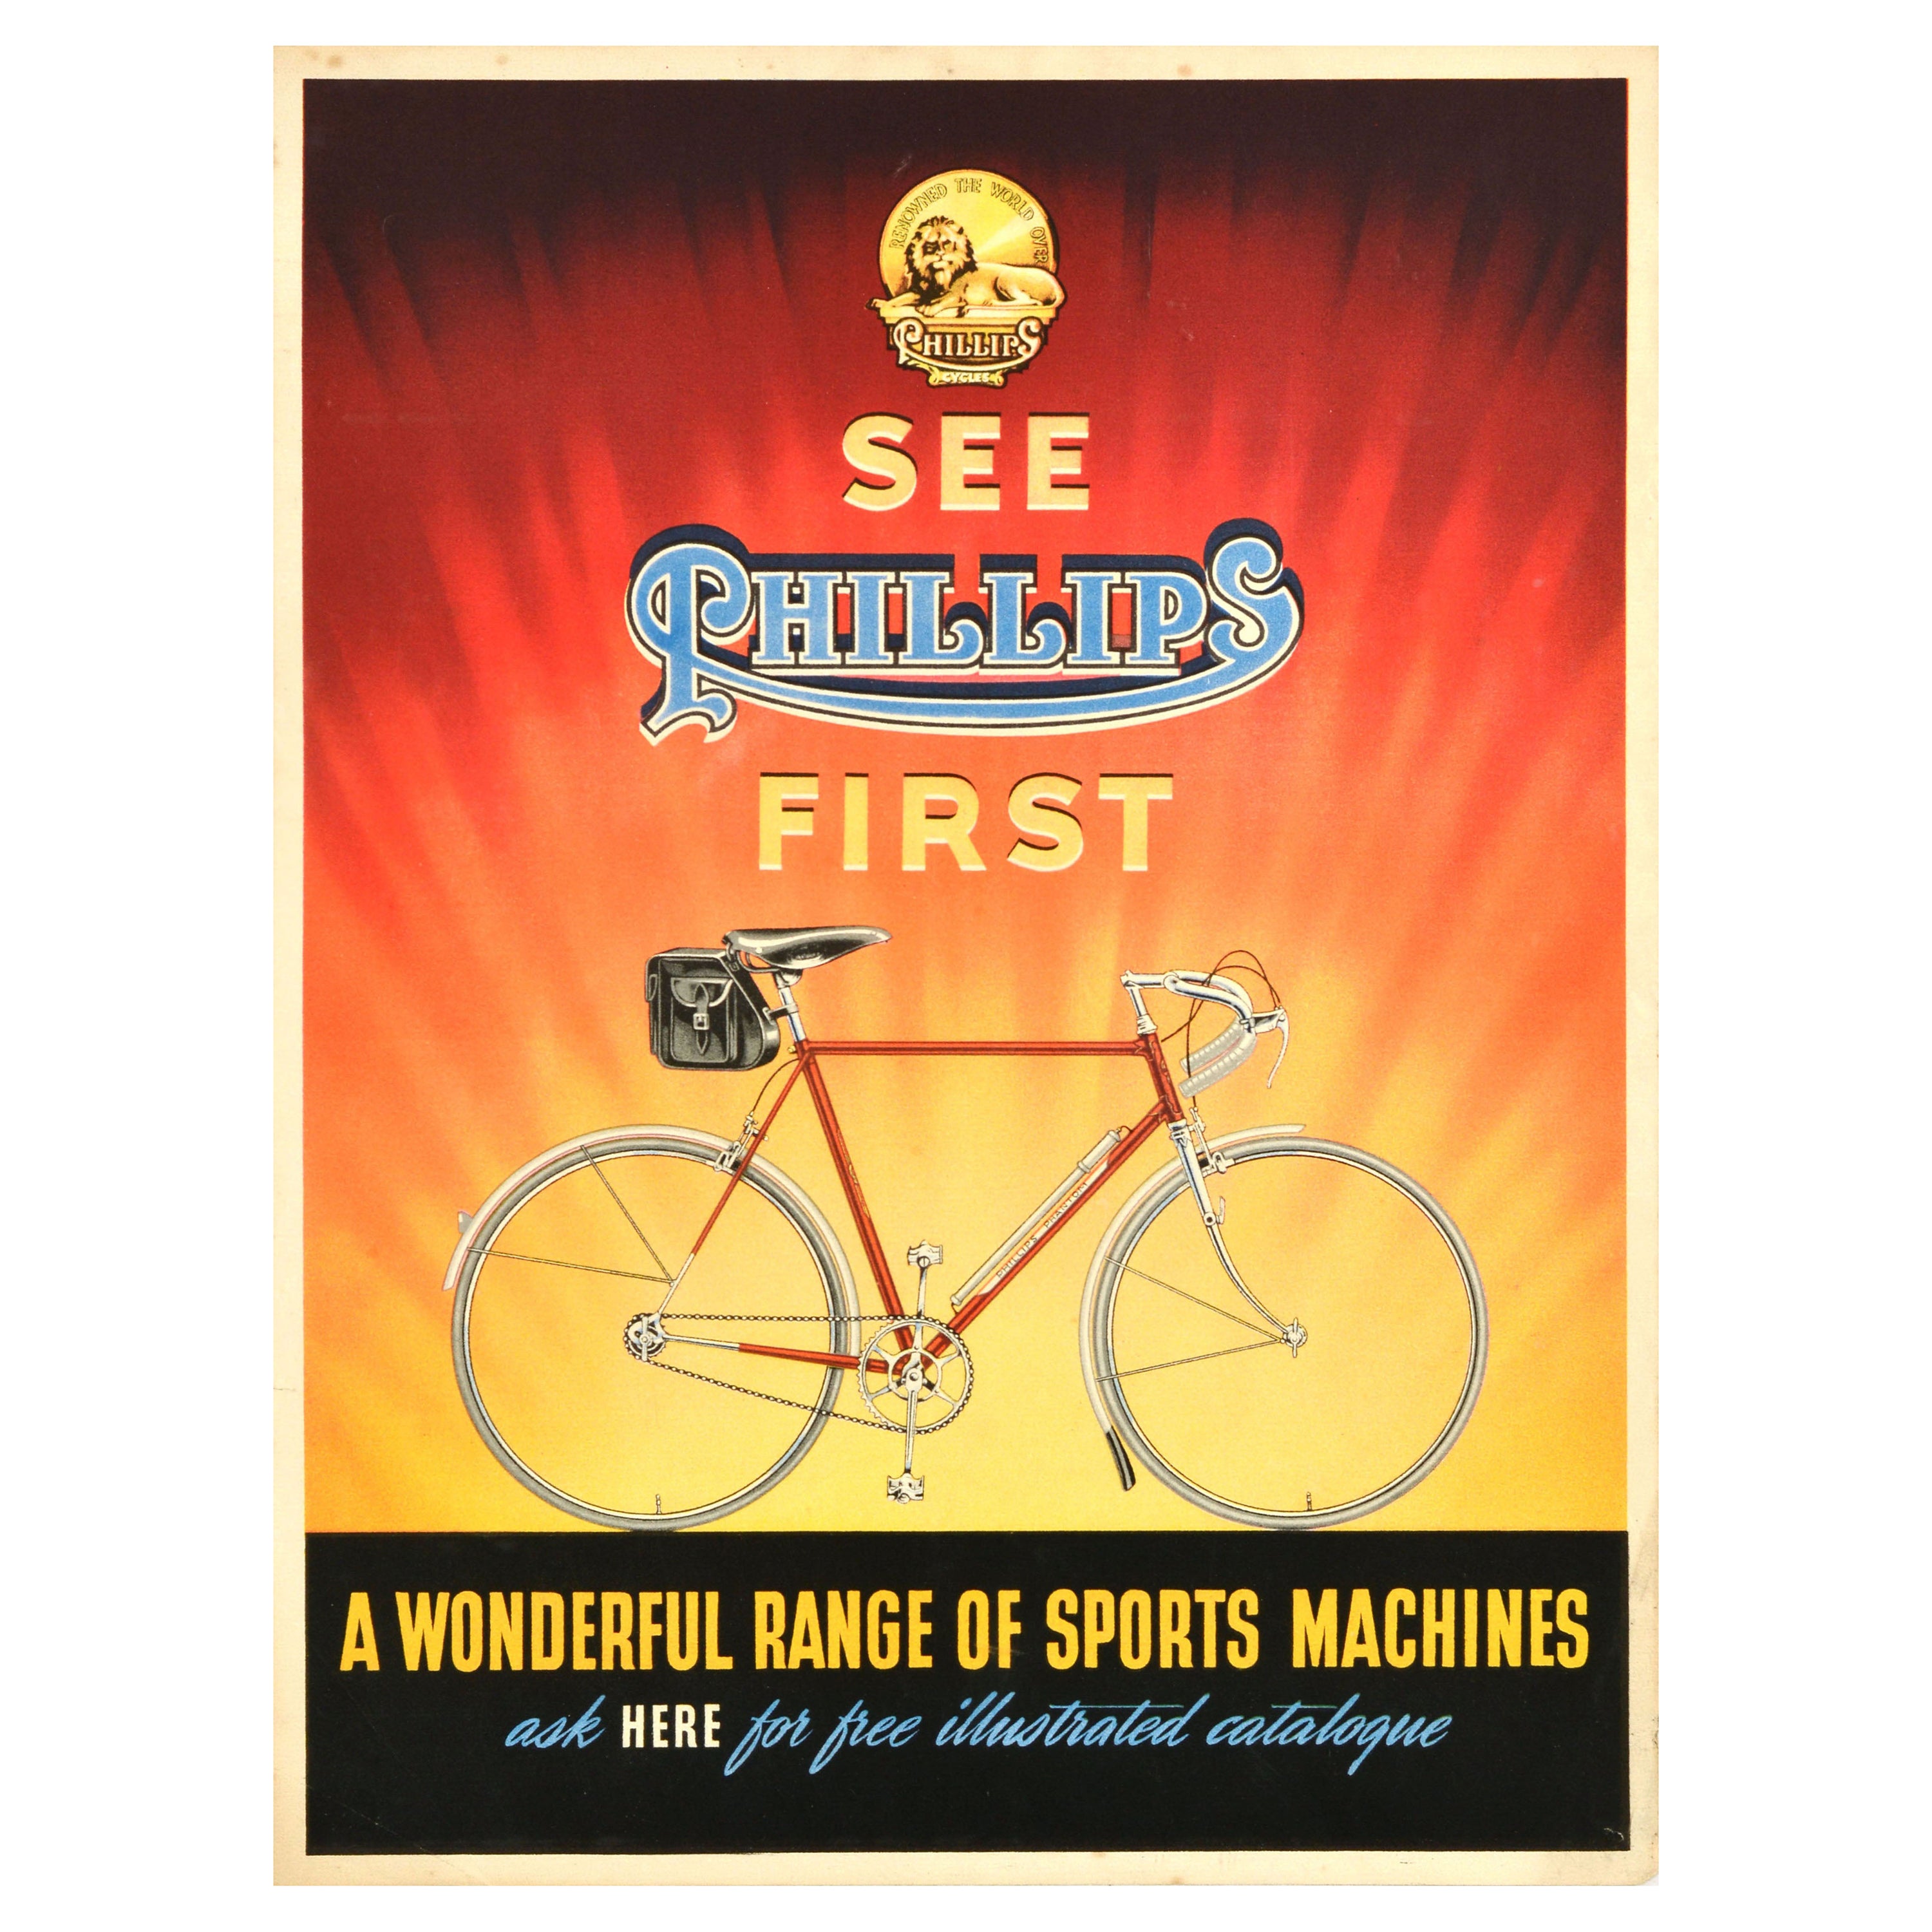 Original Vintage Bicycle Advertising Poster See Phillips First Sports Machines For Sale